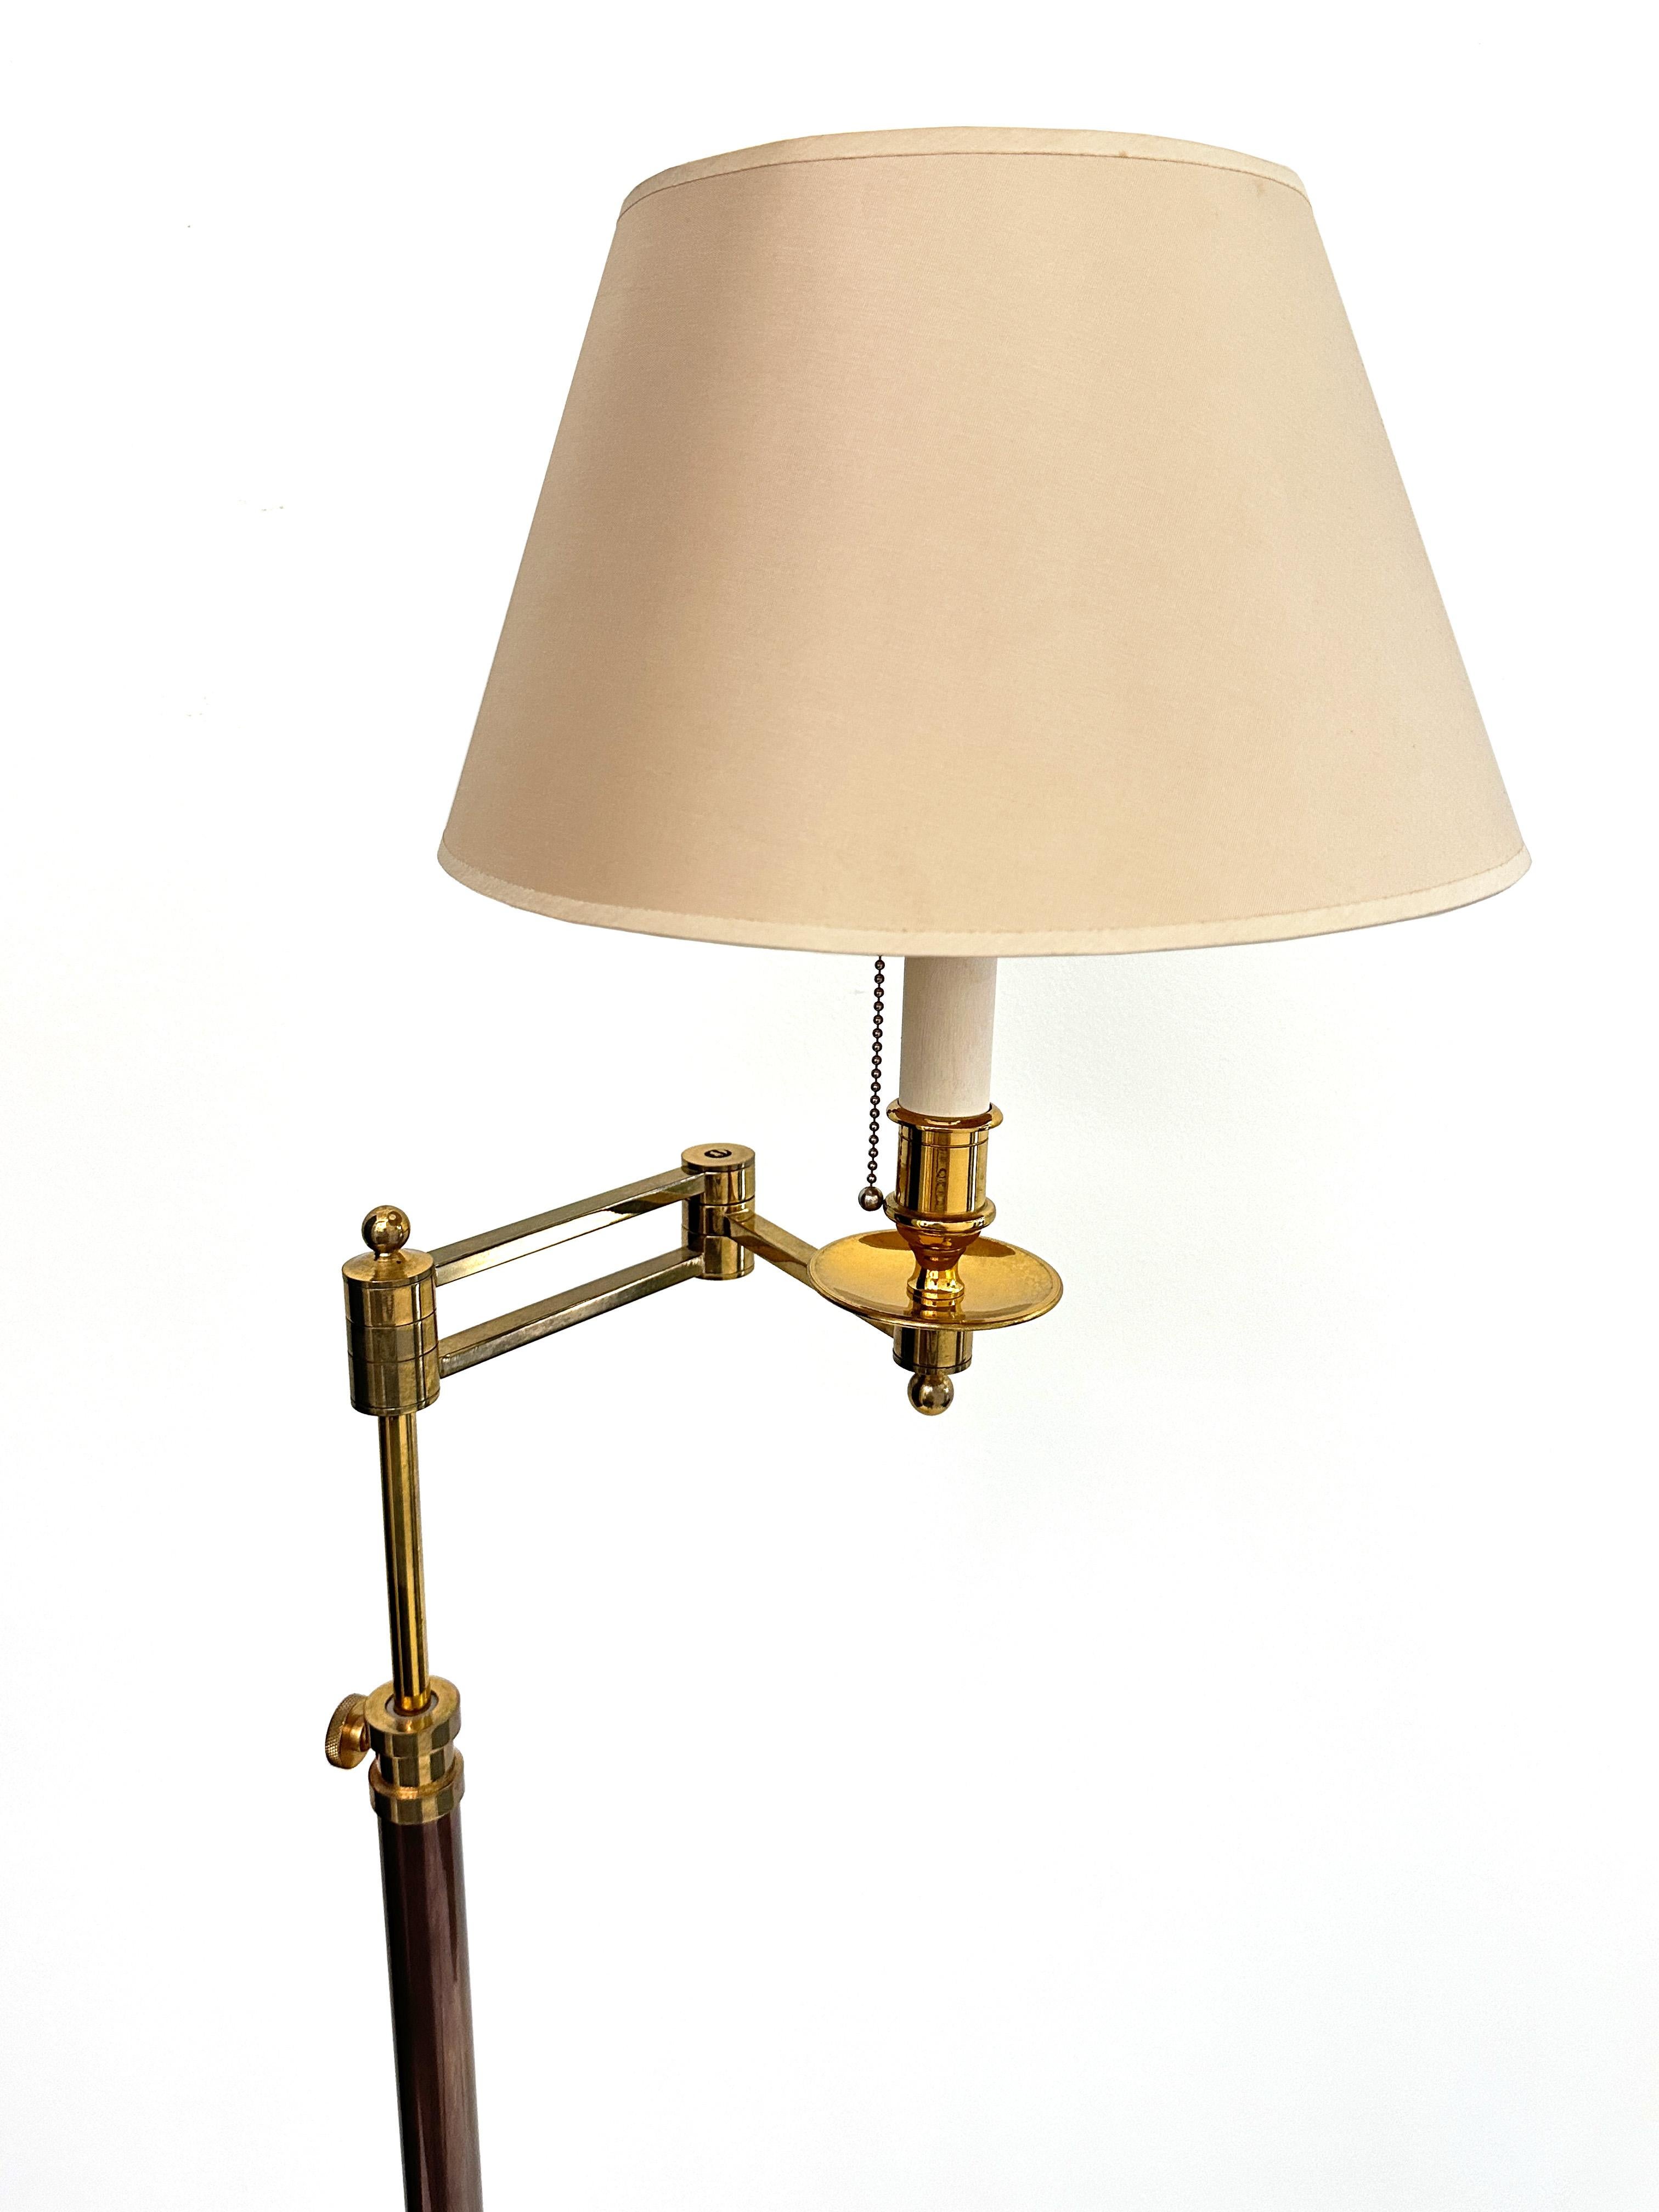 French 1900s contemporary swing arm adjustable height floor lamp. Made of brass and bronze with a beautiful pale pink lamp shade. Lamp US Standard wall plug in working conditions. 

Min height with lamp shade 60